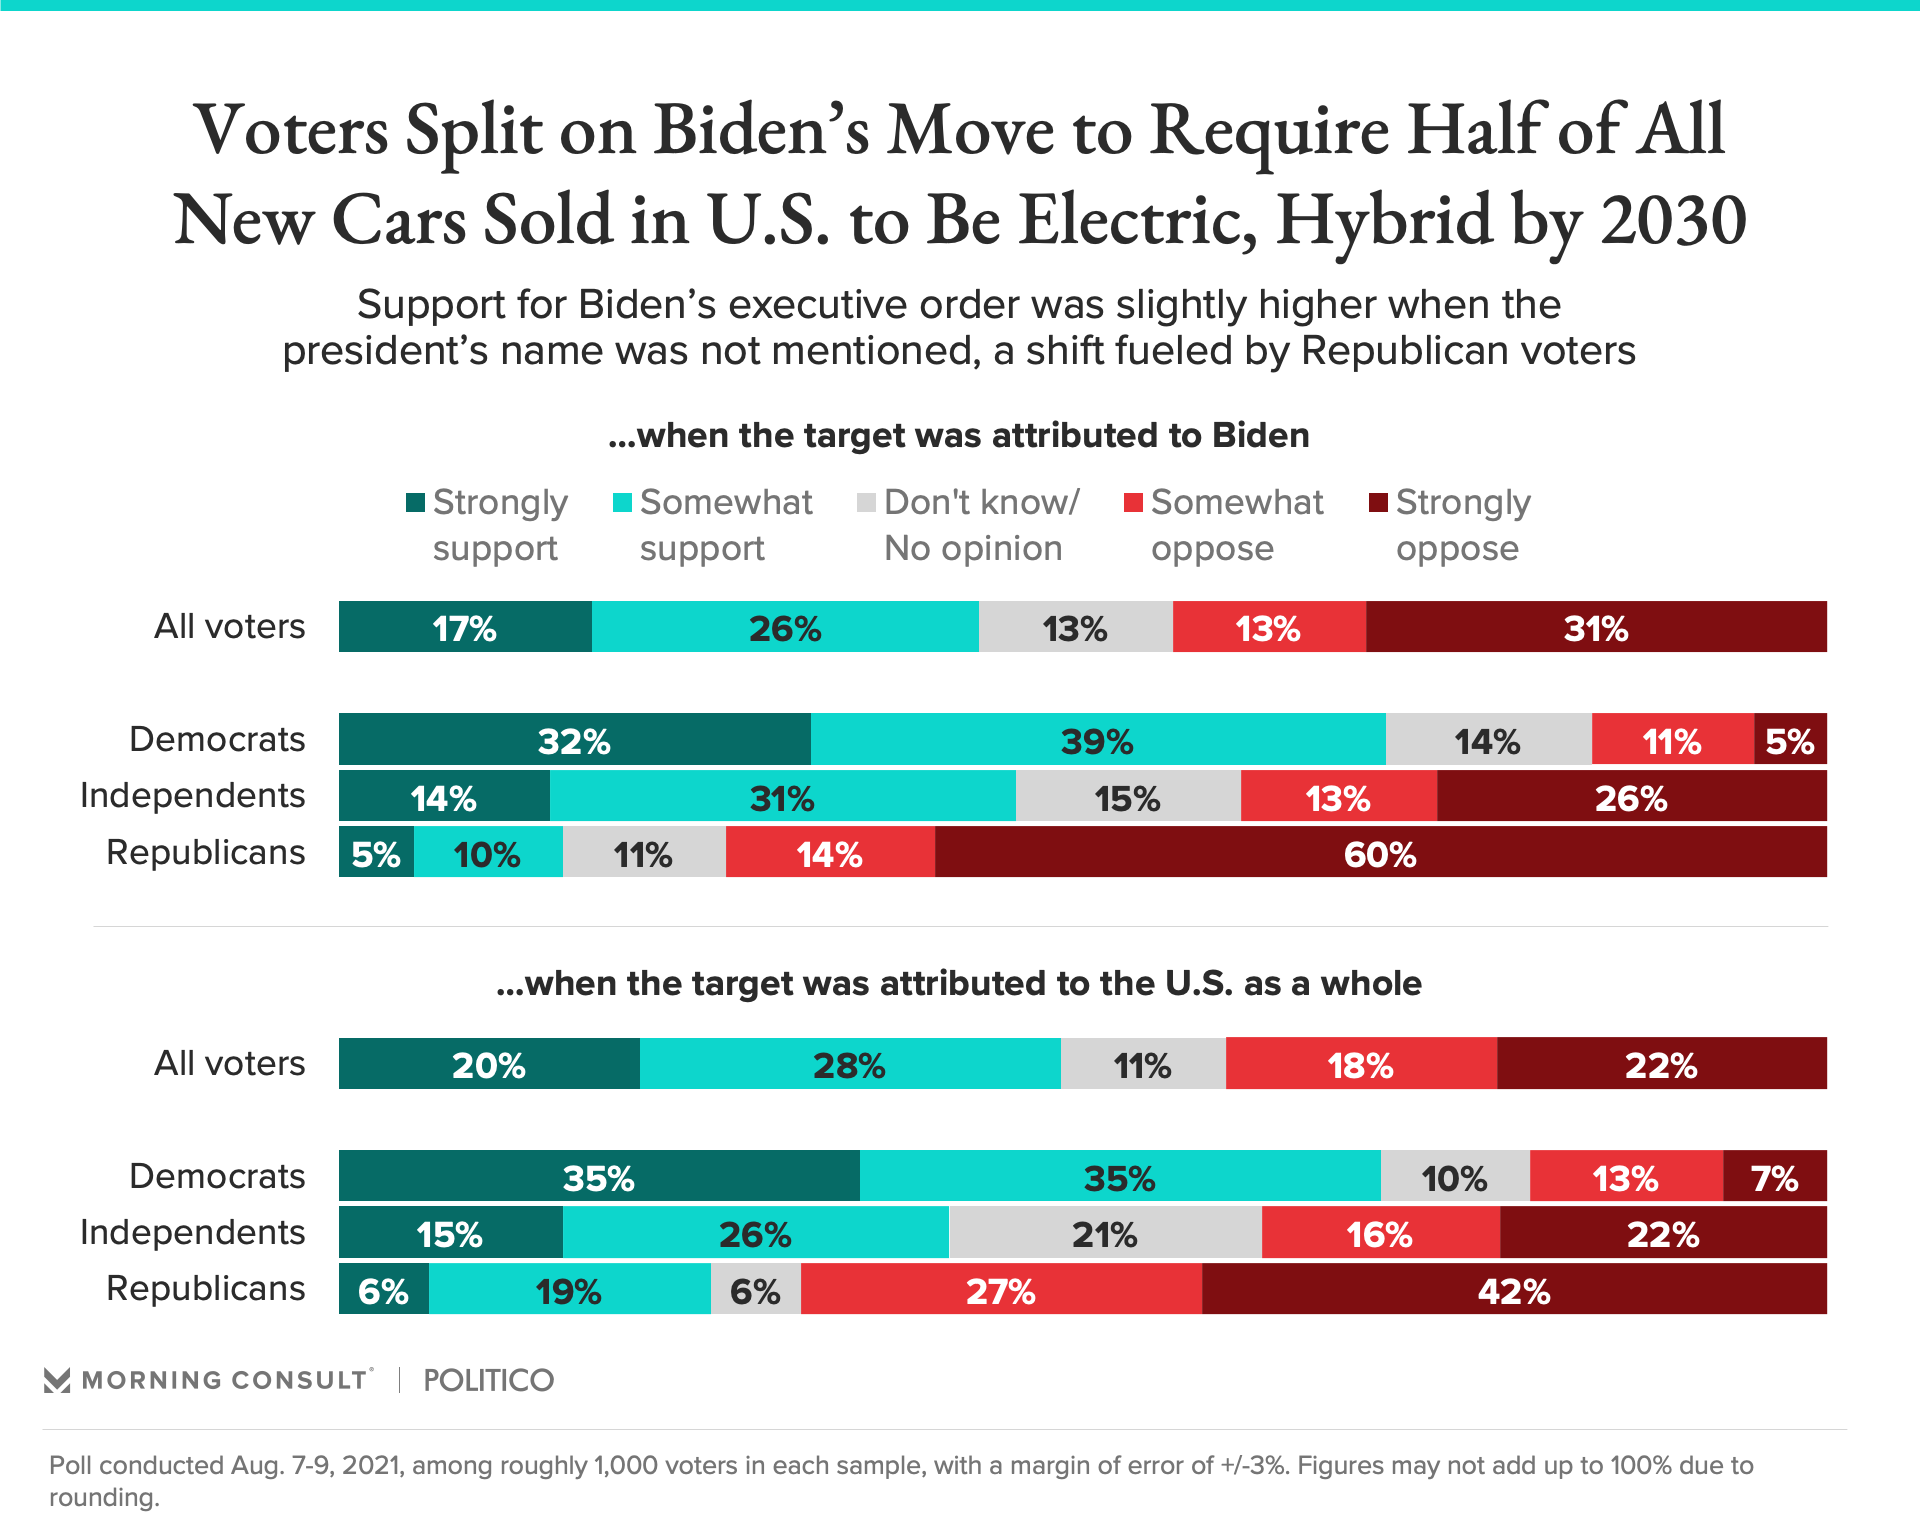 About 2 in 5 Voters Back Biden’s Goal of 50 New Electric Vehicle Sales